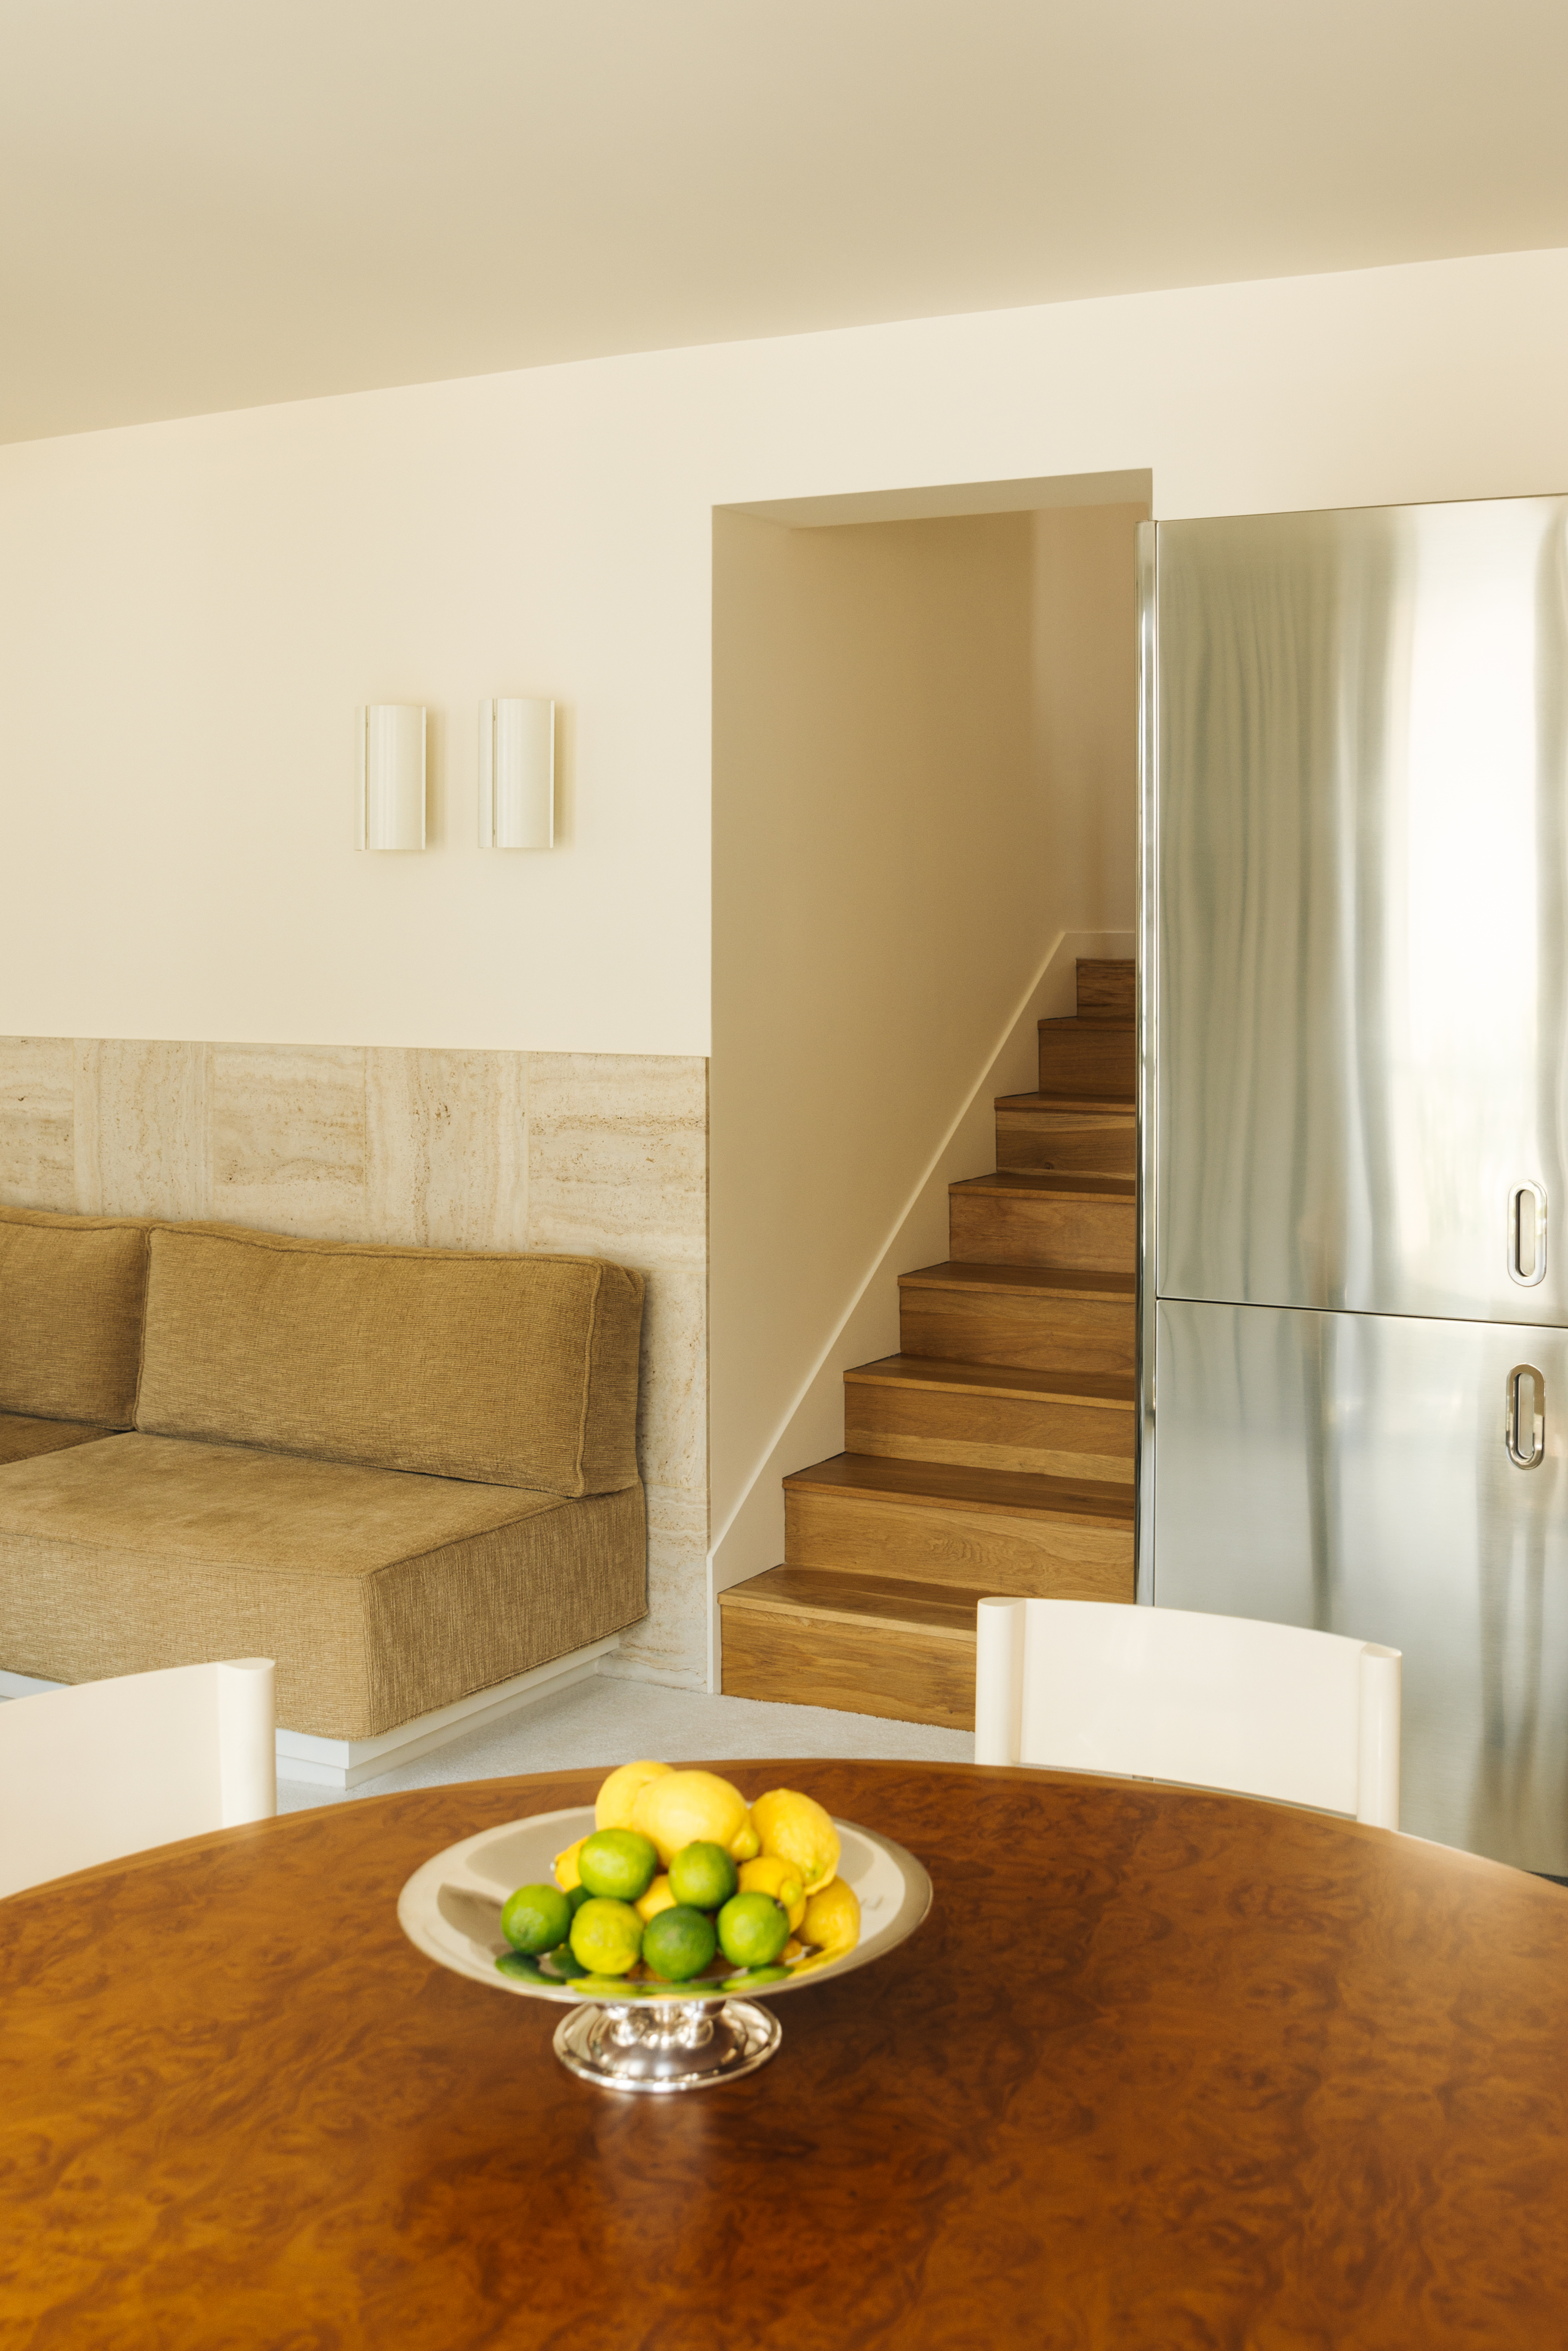 Picture of the Apartment projet in Le Marais